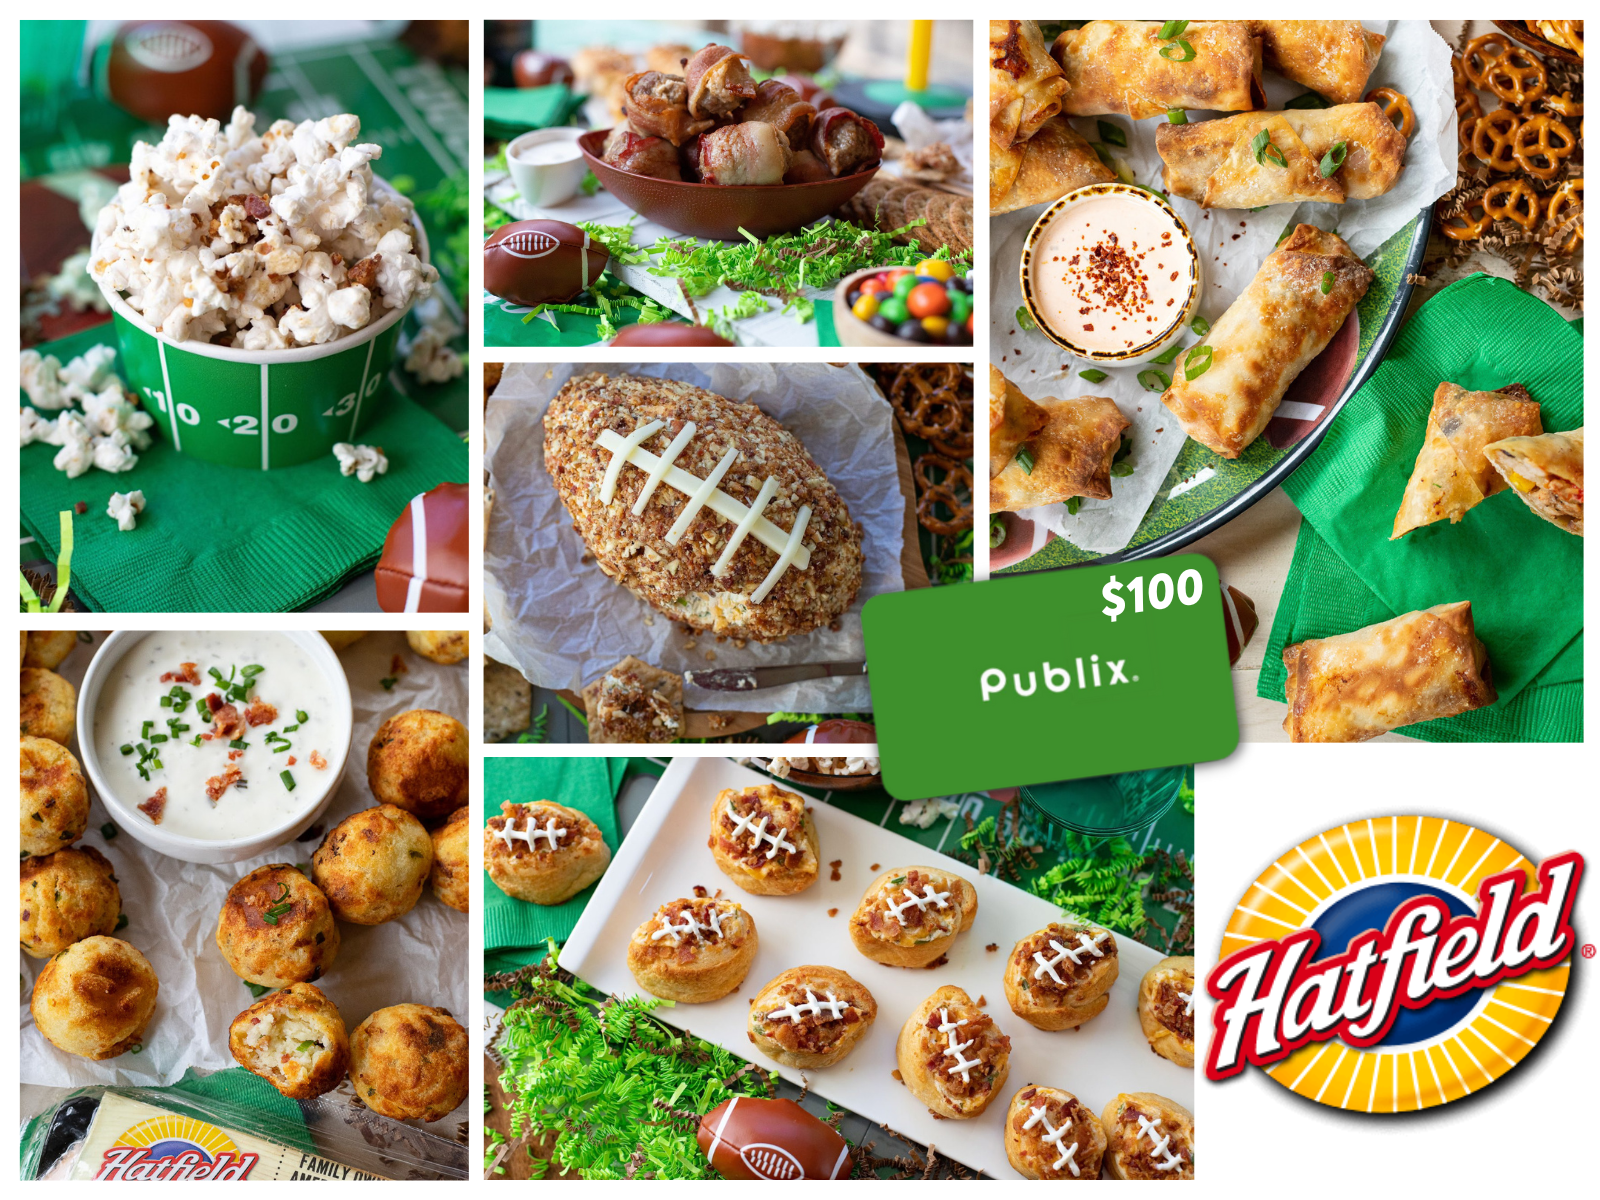 Be The Game Day MVP When You Serve Up Tasty Hatfield Products! Enter To Win A $100 Publix Gift Card